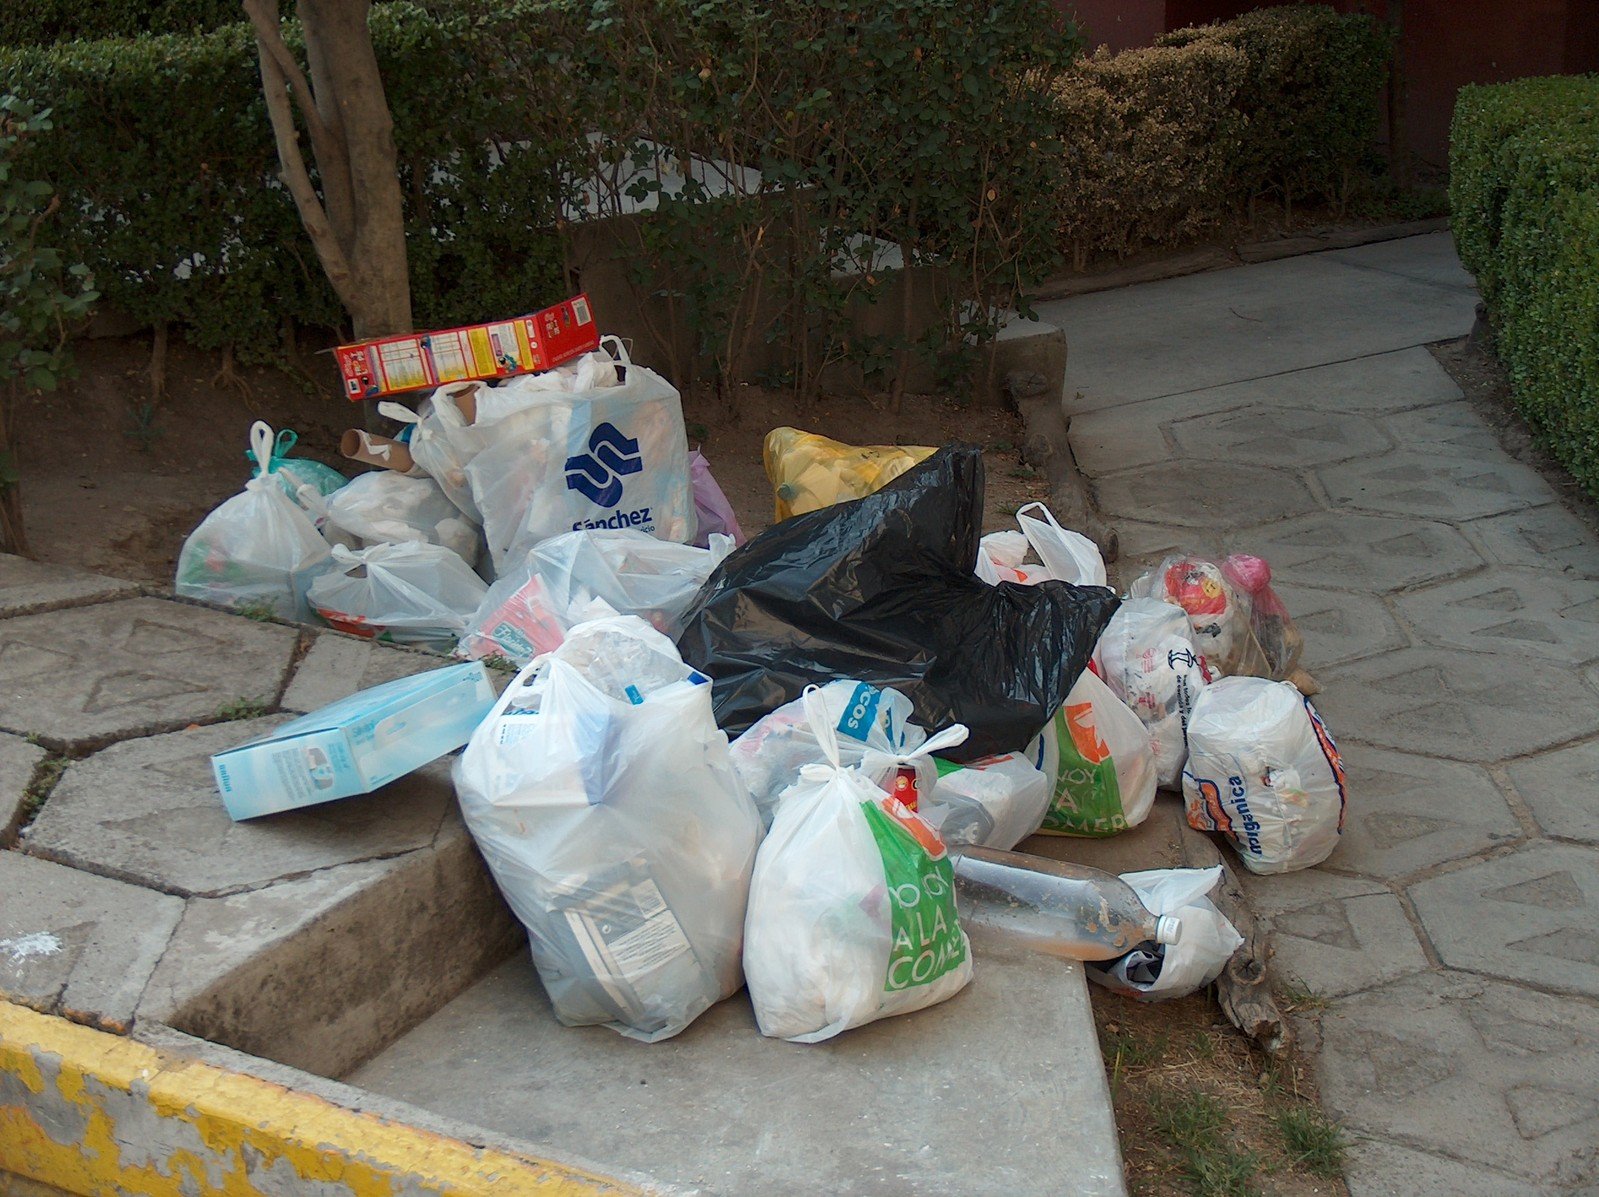 many bags and garbage on a sidewalk near bushes